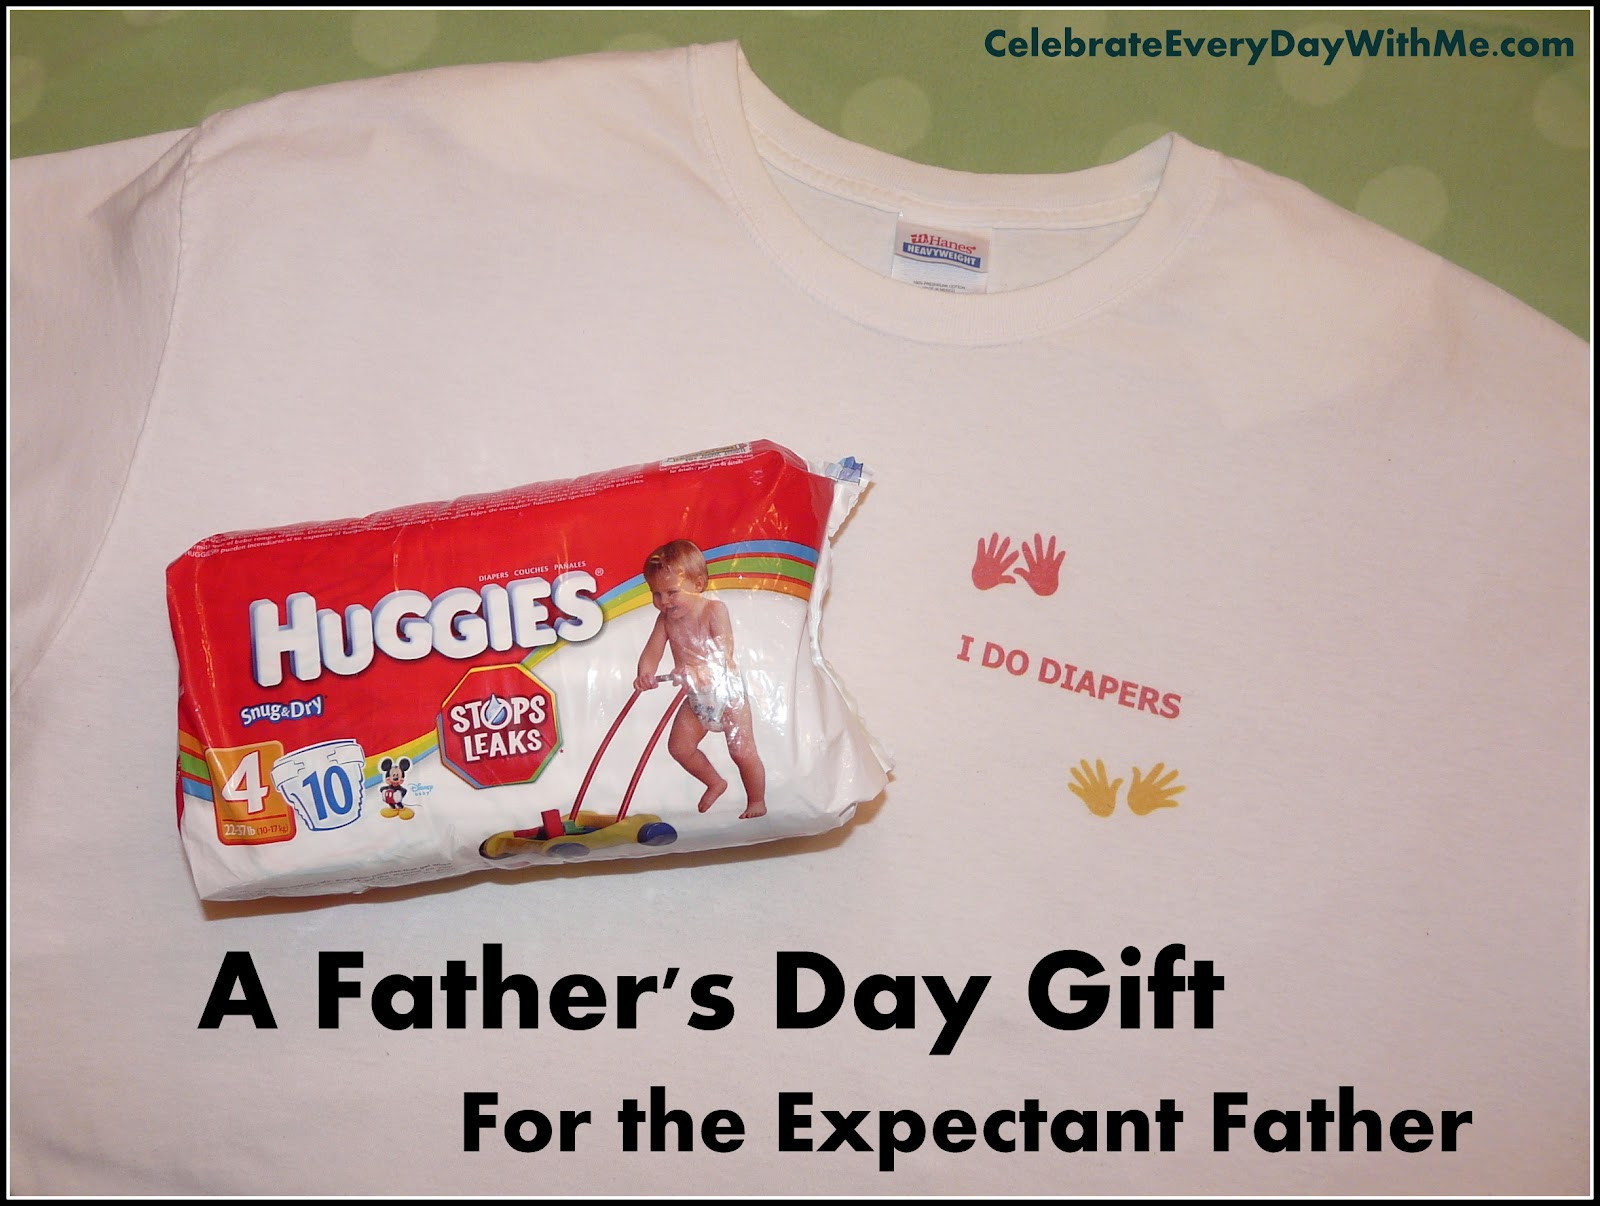 Expectant Fathers Day Gift Ideas
 A Father’s Day Gift for the Expectant Father